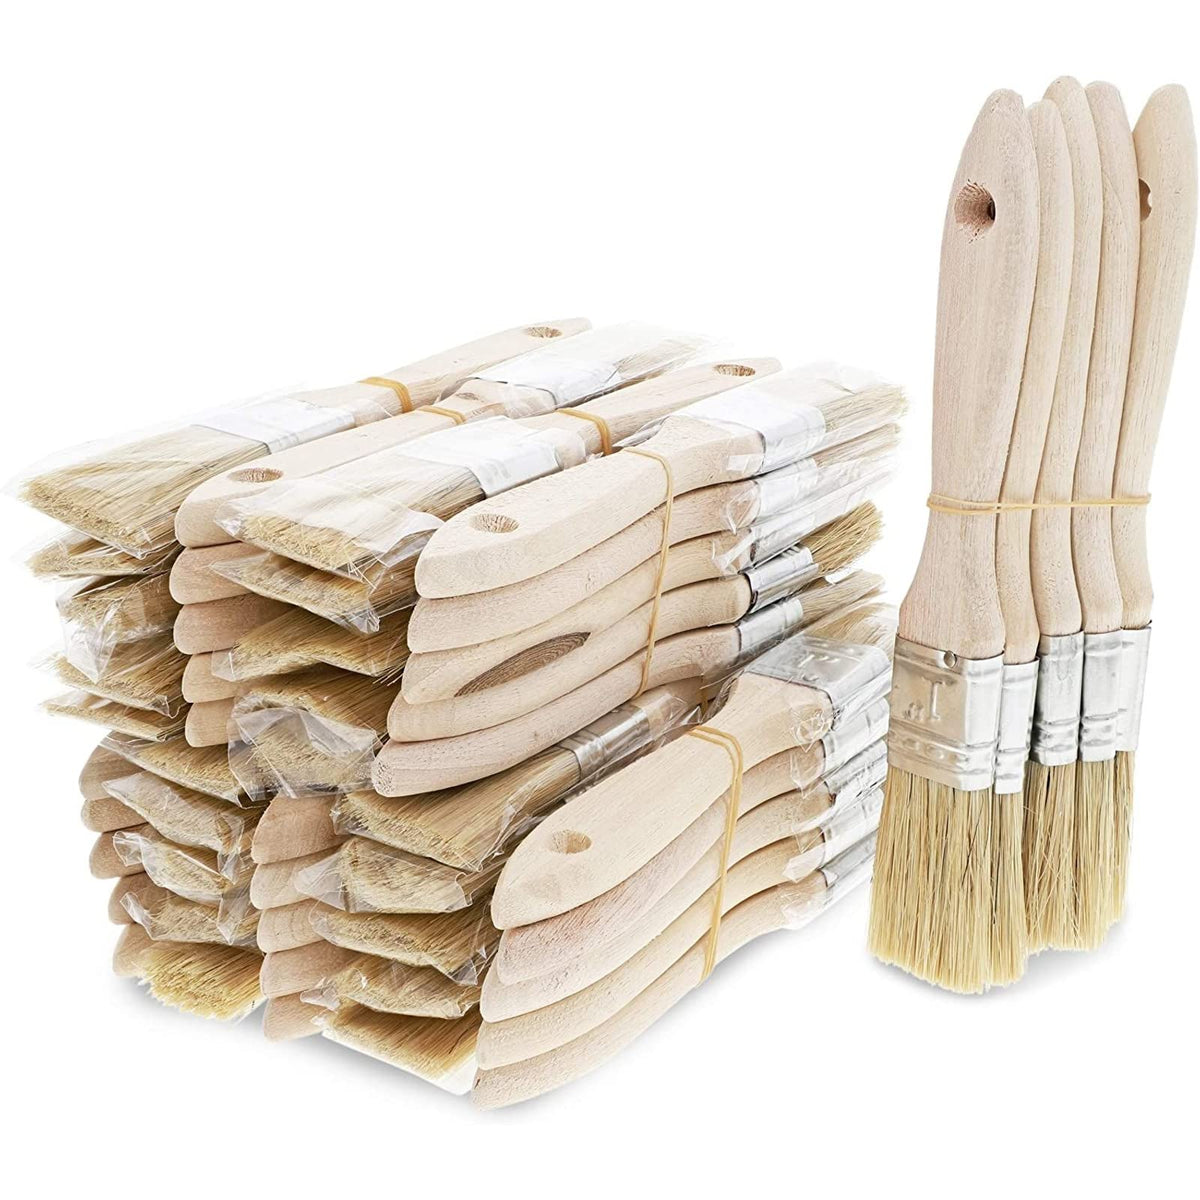 Vermeer Chip Paint Brushes - 36-Pack - 1/2 Chip Brushes for